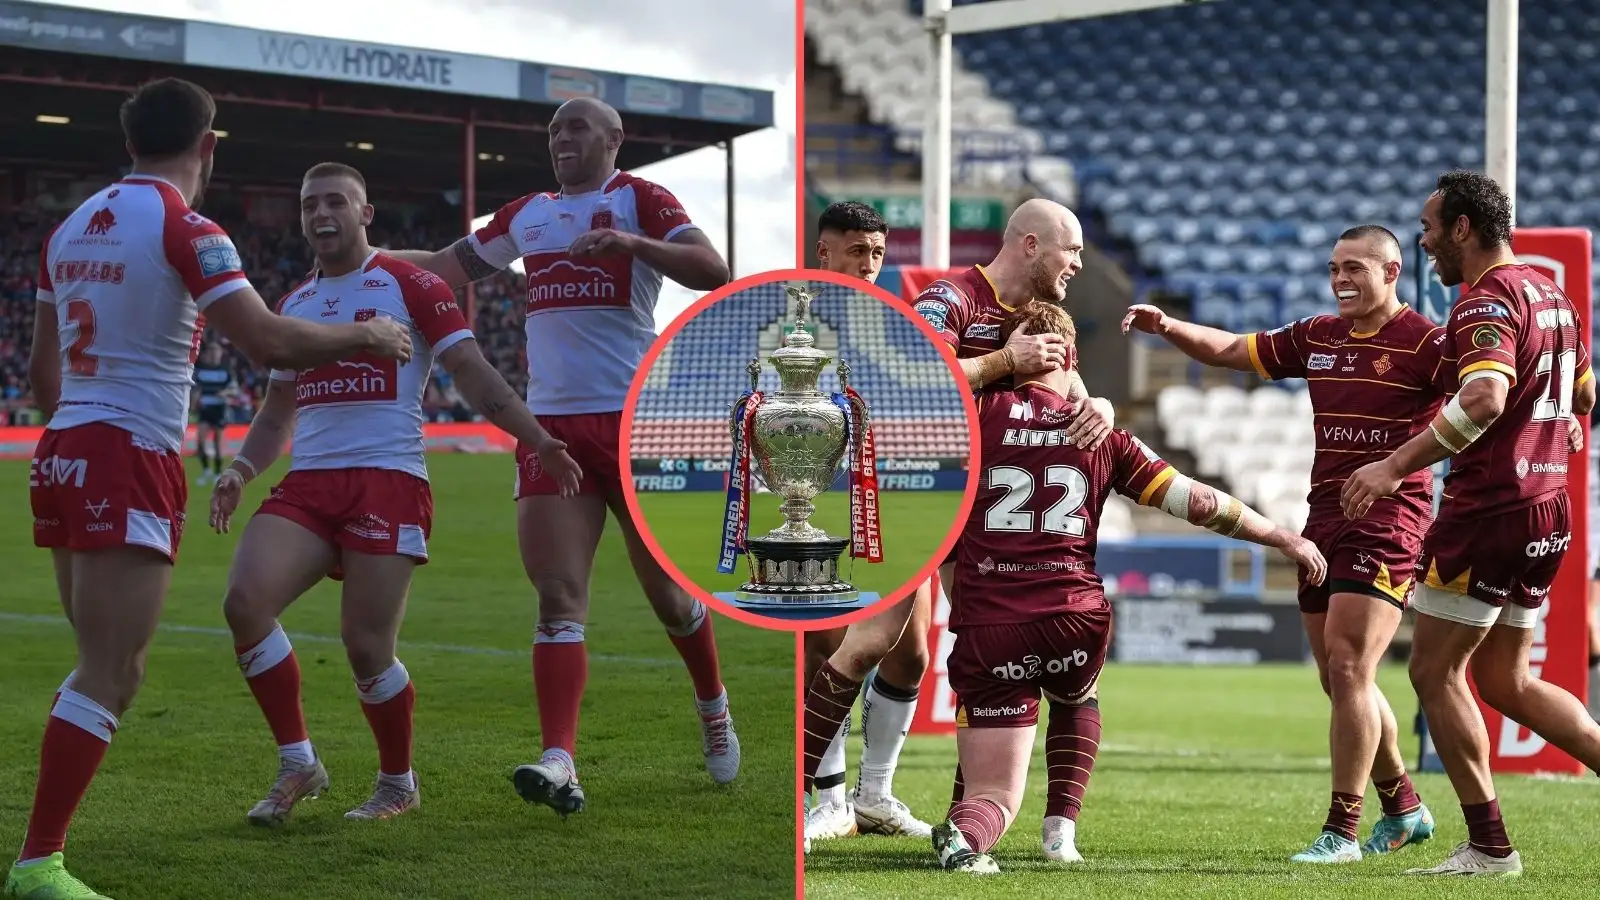 Hull KR celebrate a try, Challenge Cup trophy, Huddersfield Giants celebrate a try